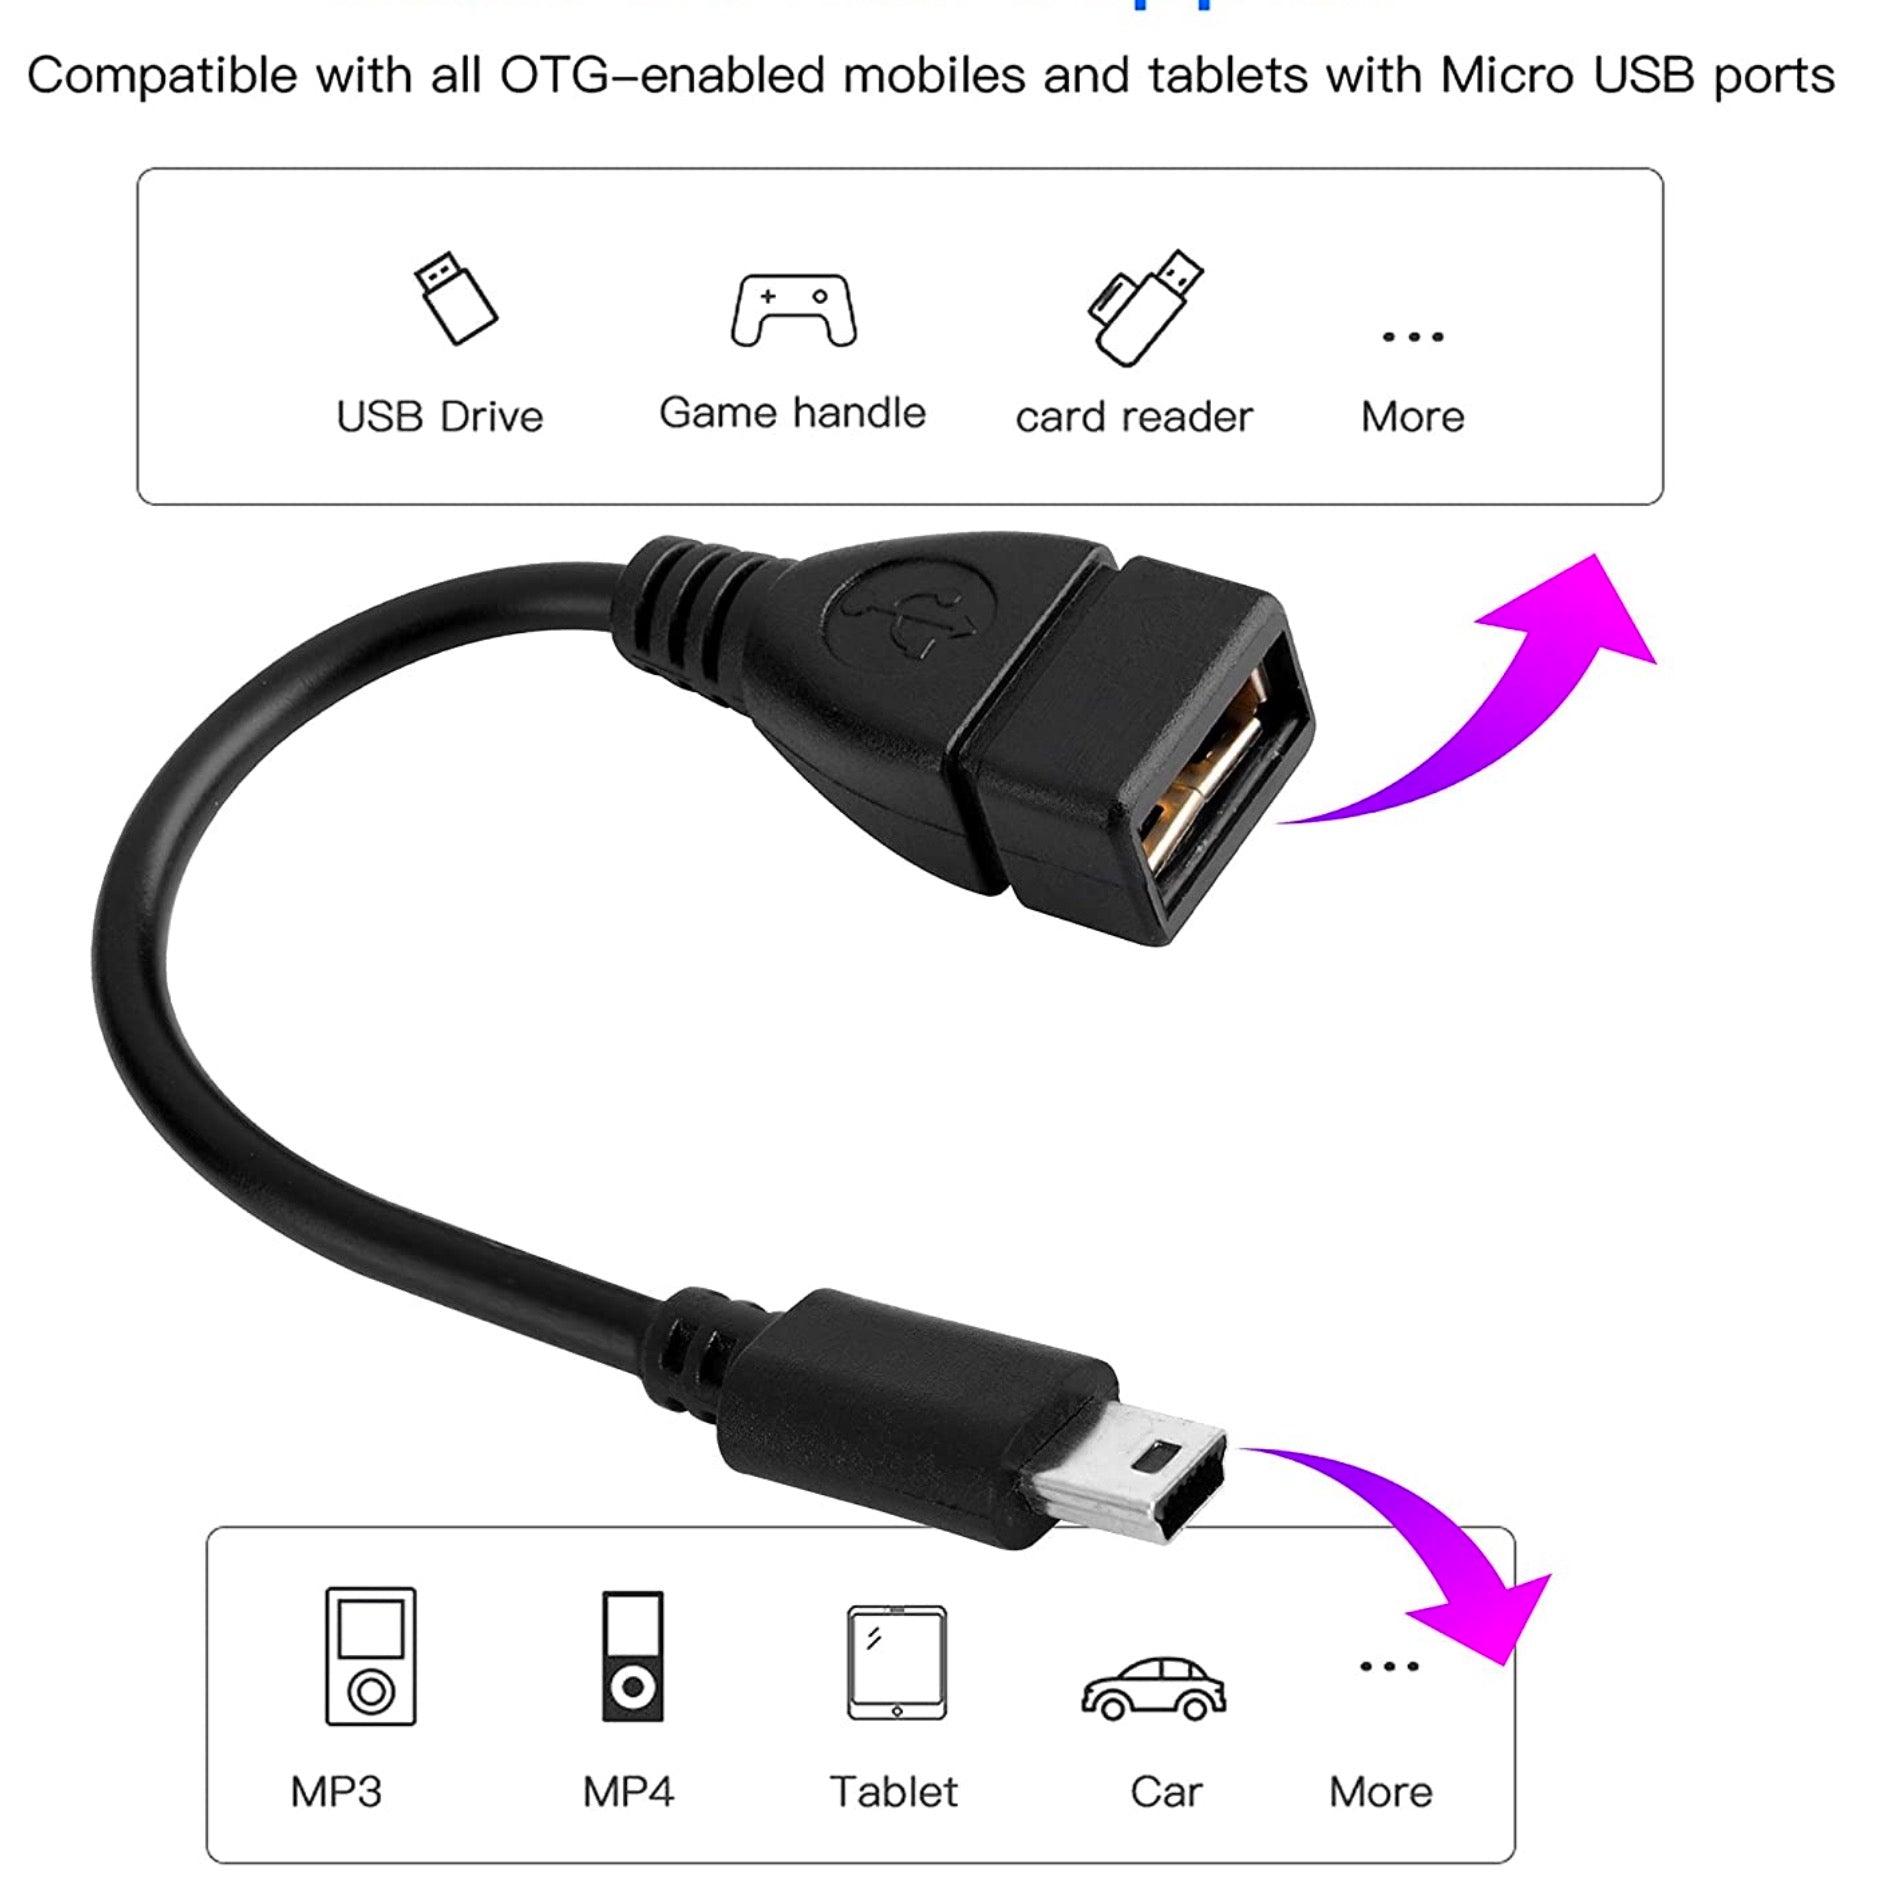 USB-A 2.0 Female to USB-B Mini 5 Pin Male OTG Adapter Cable 0.15m